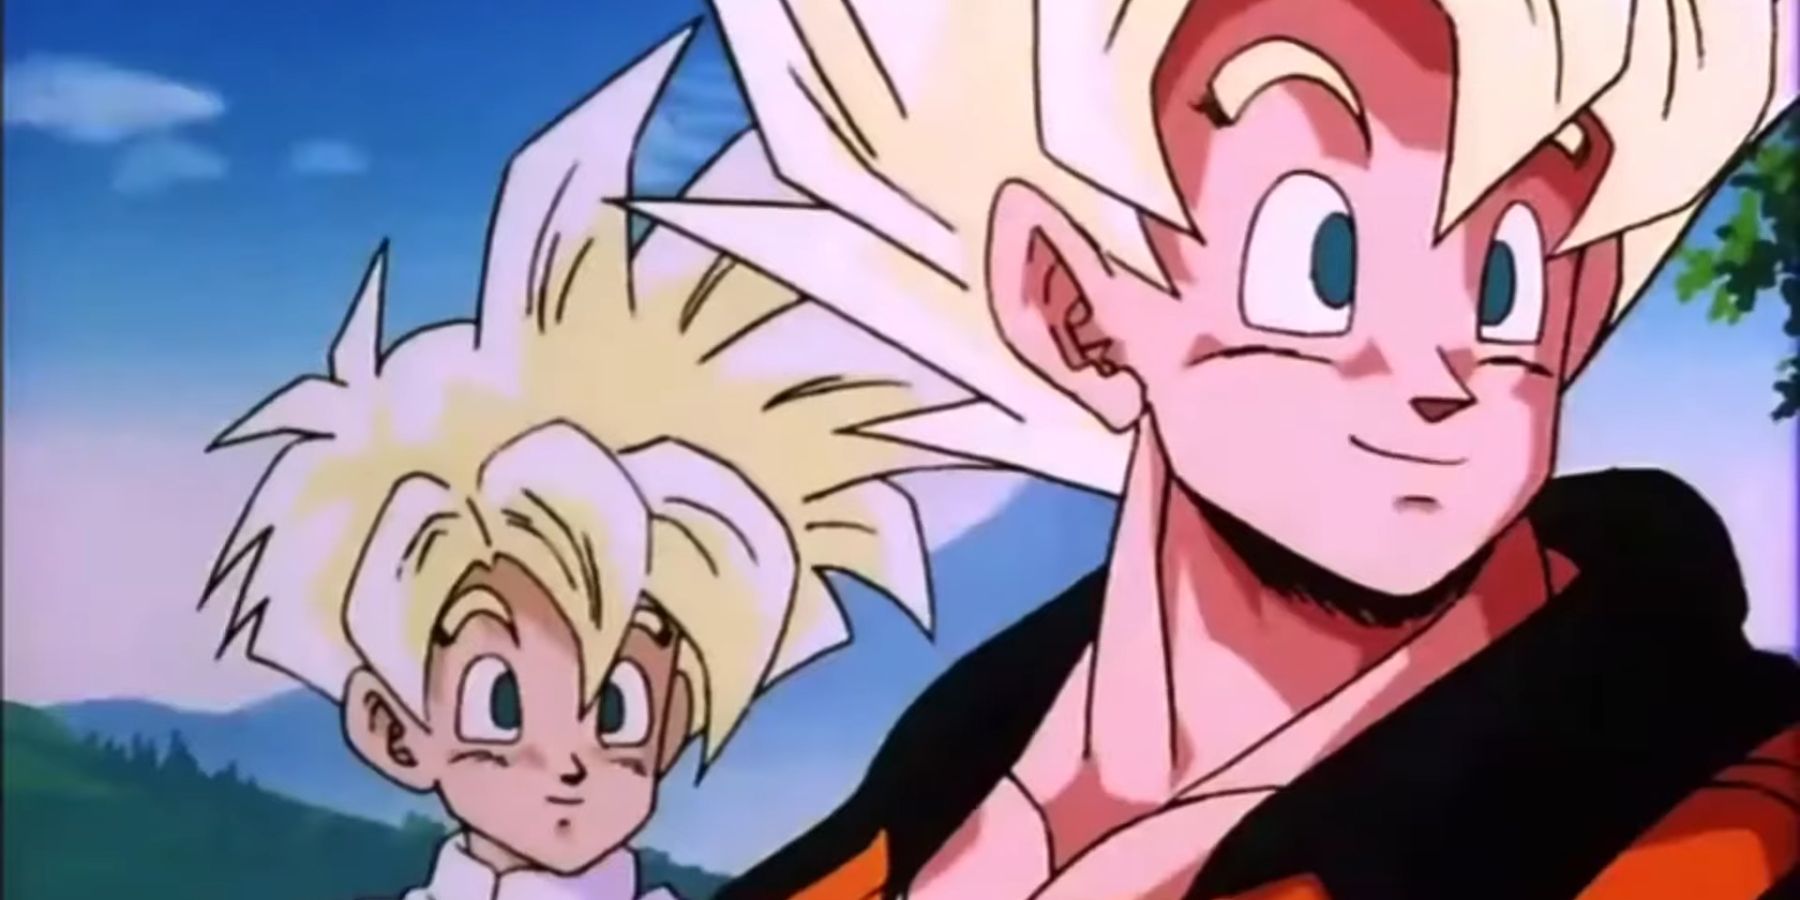 Goku and Gohan relaxing in their Super Saiyan Full Power forms in Dragon Ball Z